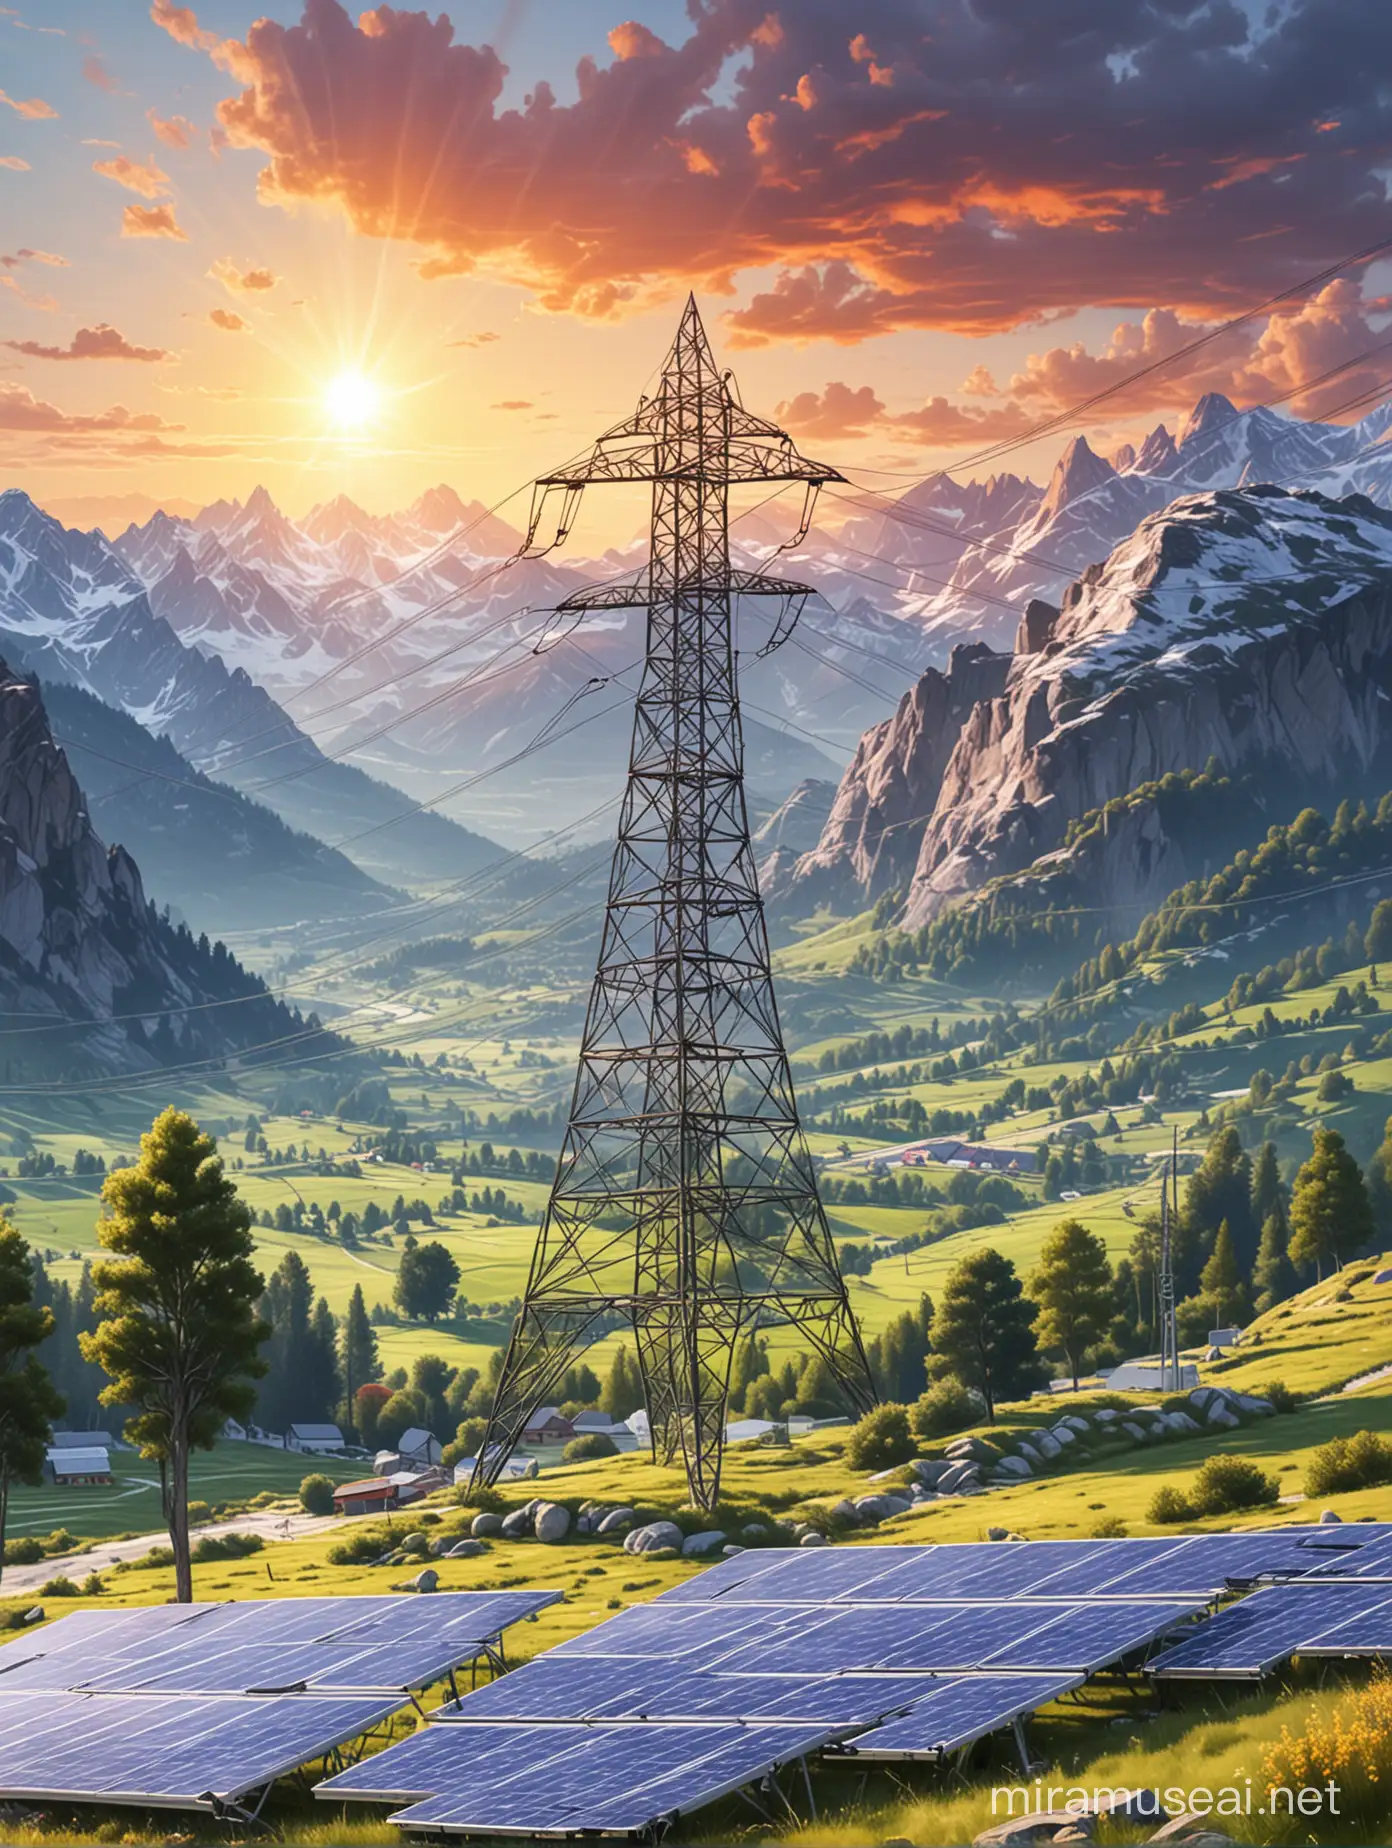 bright digital painting, illustrating co-optimized electricity market with high voltage pylon in Alpine nature surroinding with solar panels
